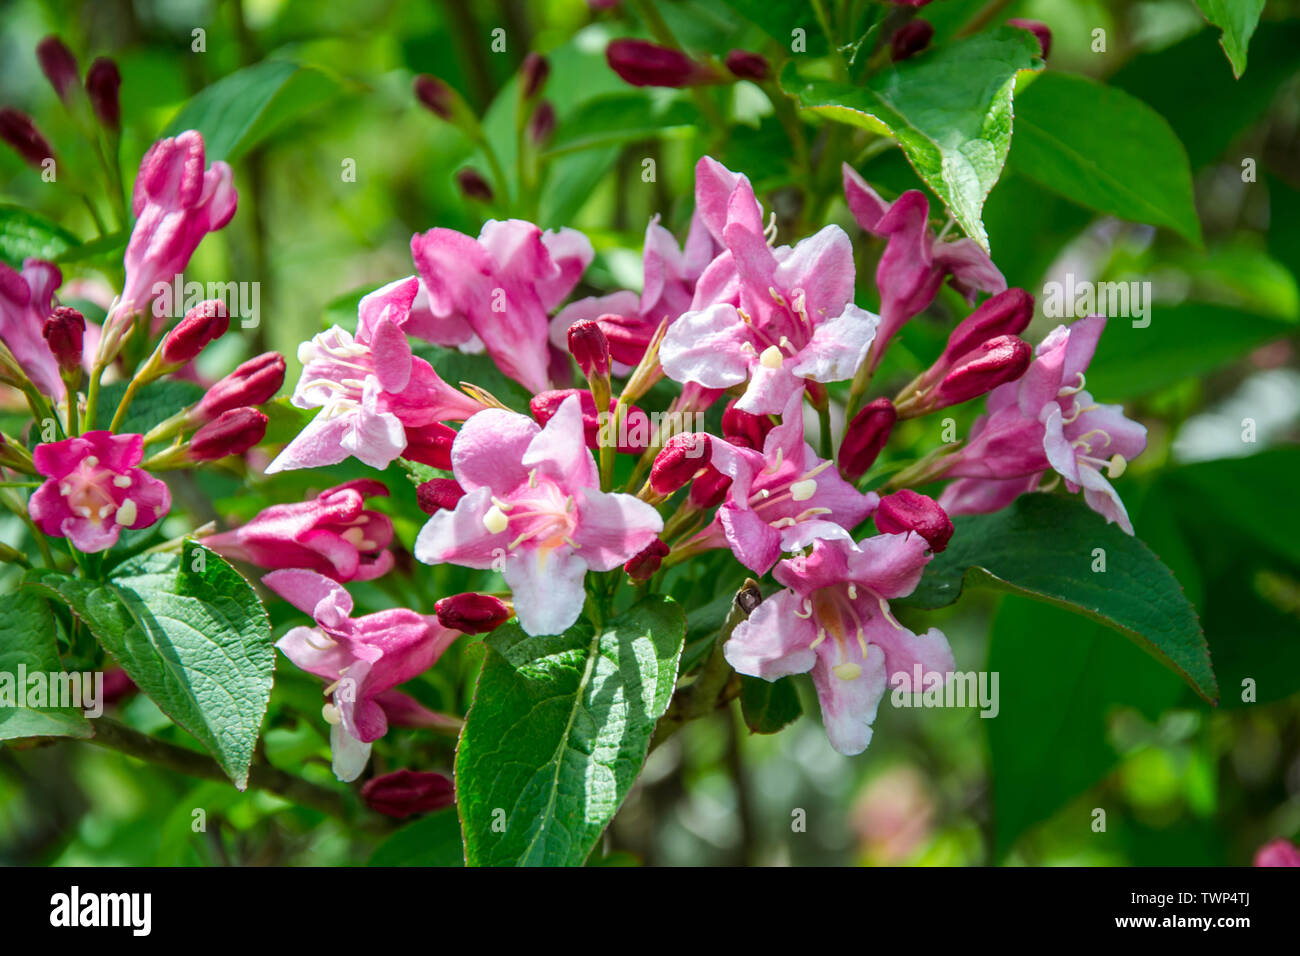 Close-up of Weigela Rosea funnel shaped pink flower, fully open and closed small flowers with green leaves. Selective focus of bright pink petals Stock Photo